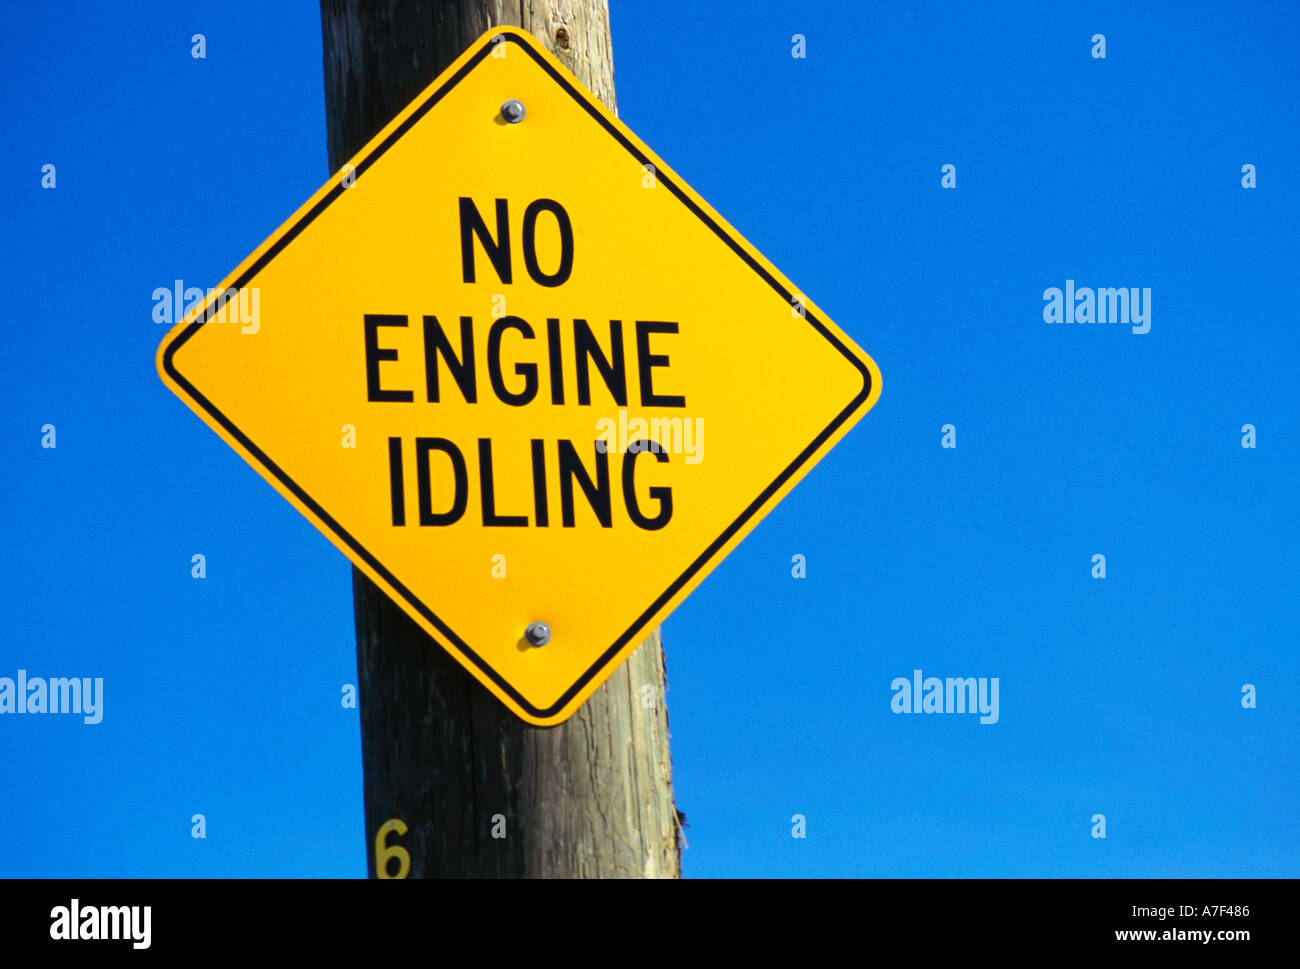 No Engine Idling diamond shaped yellow road sign or traffic sign on a utility pole with a clear blue sky background Stock Photo